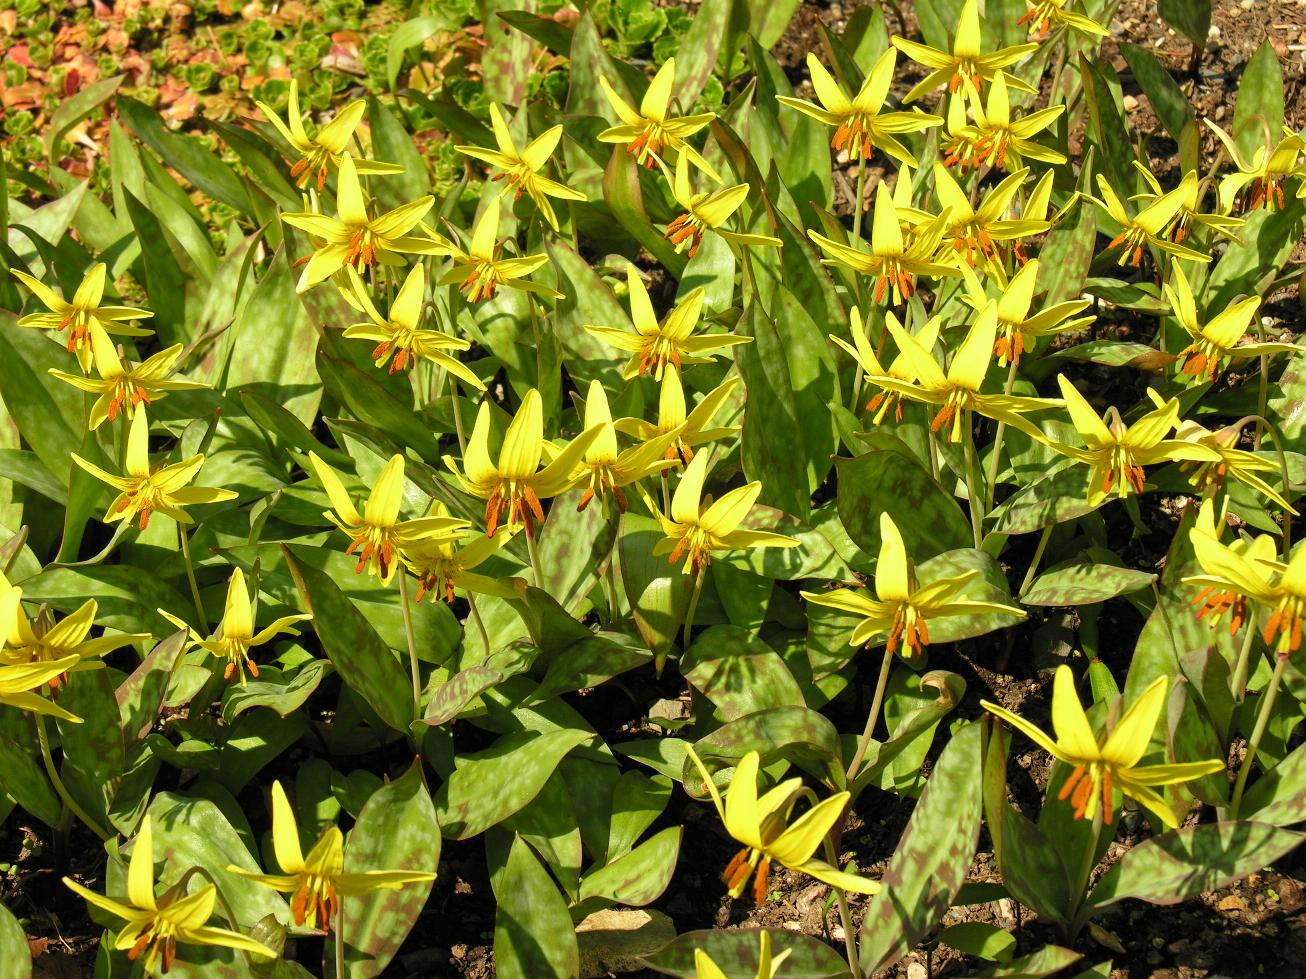 Erythronium americanum Erythronium americanum how to get it to flower Forum topic